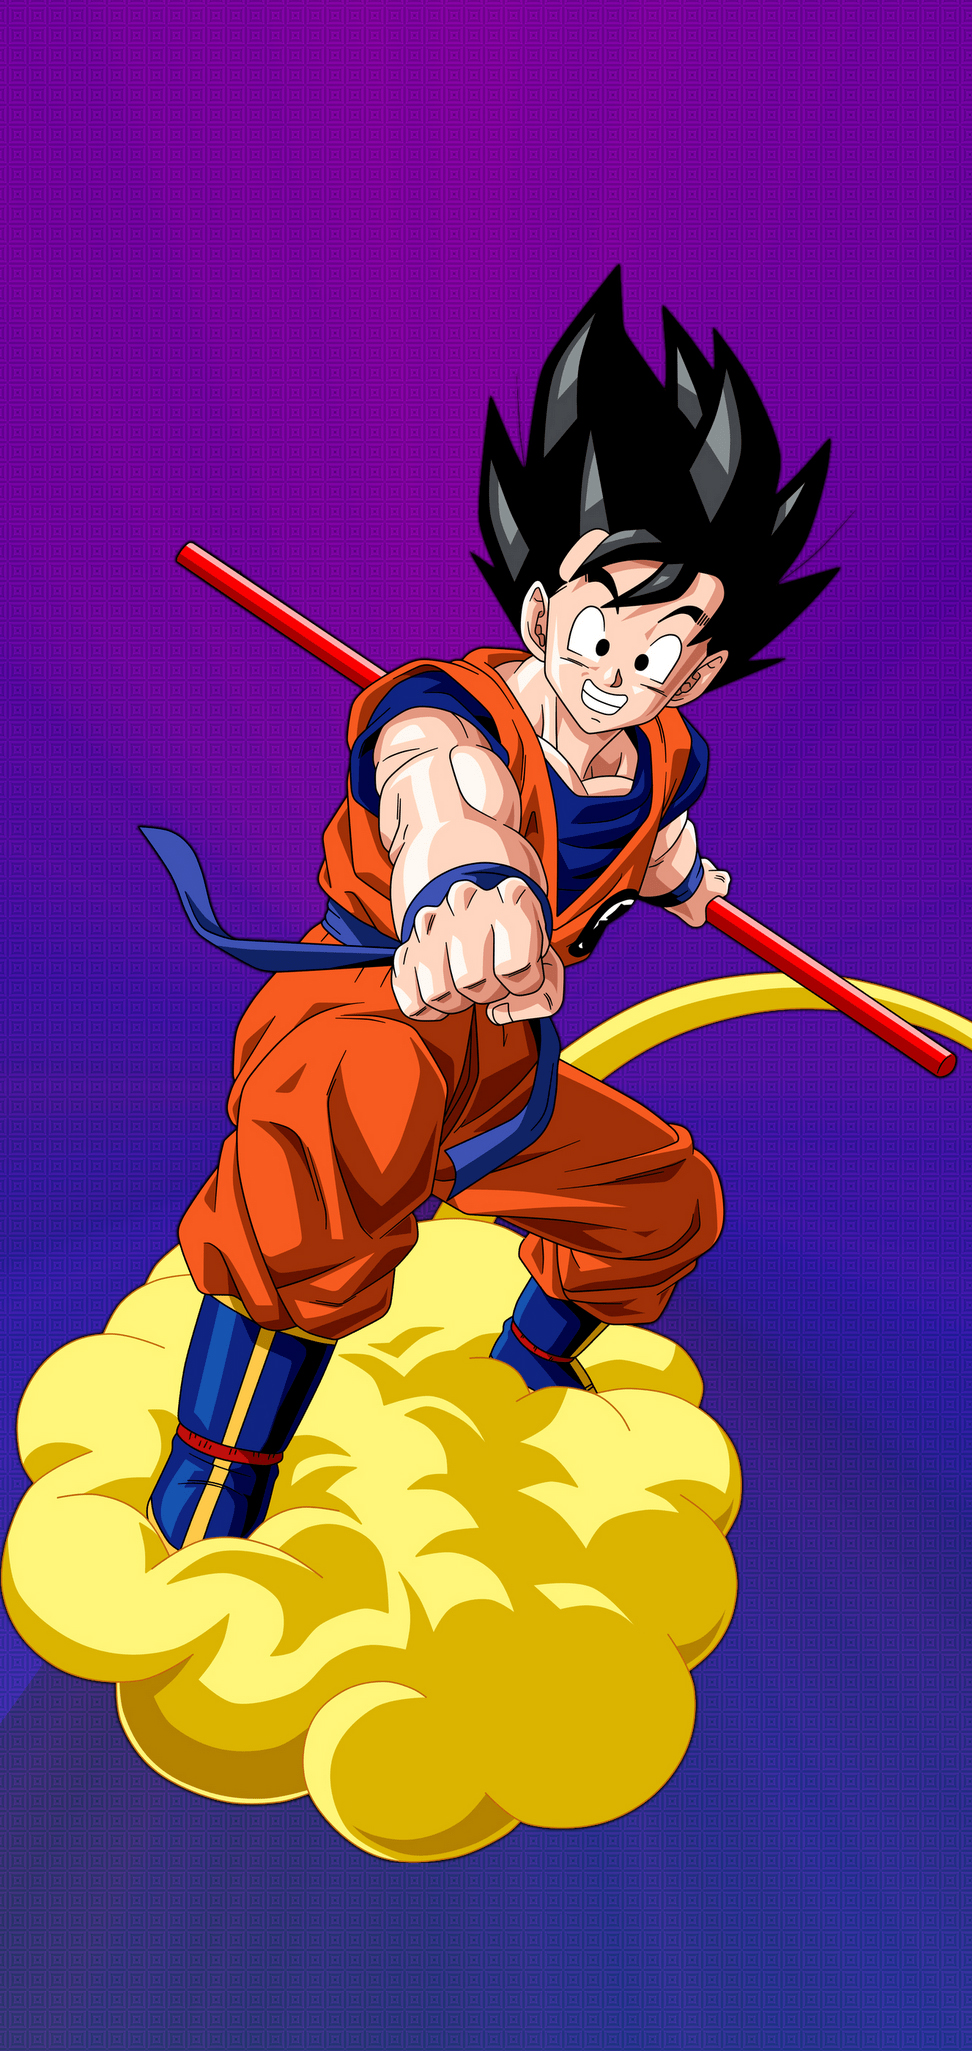 Download Dragon Ball Z wallpapers for iPhone in 2023  iGeeksBlog  Anime dragon  ball goku Dragon ball z iphone wallpaper Dragon ball wallpapers